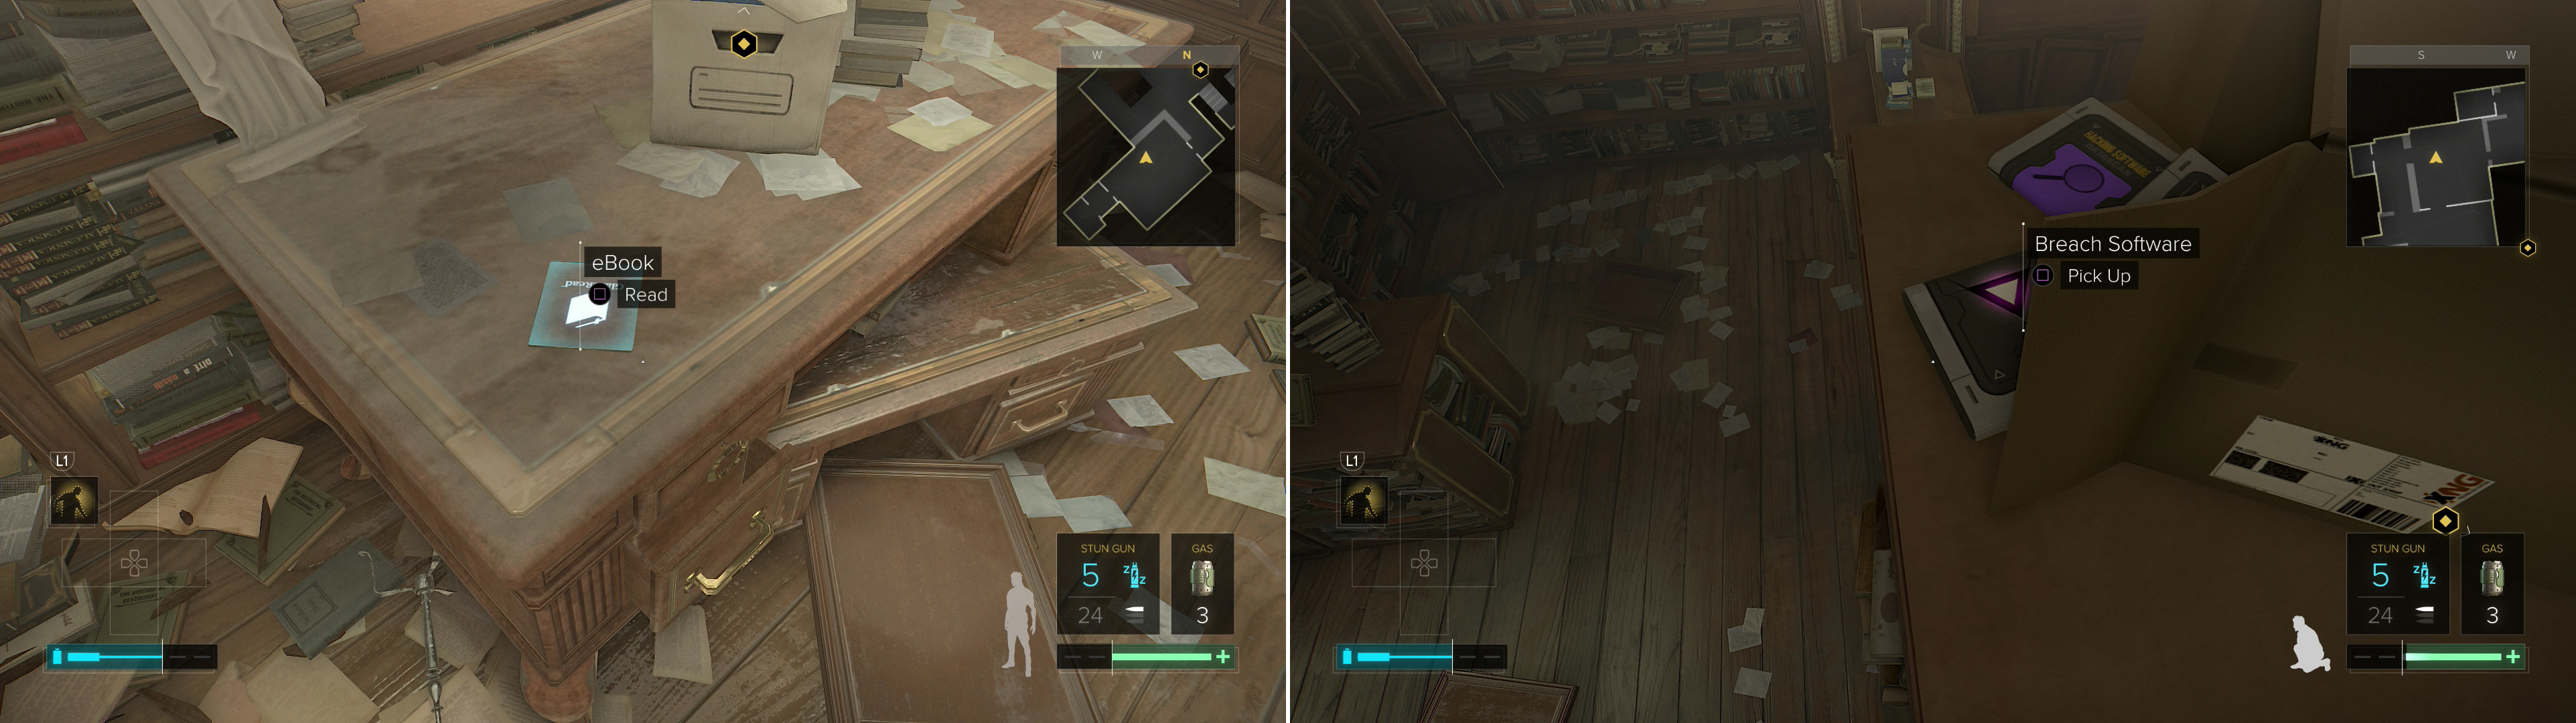 After meeting Koller, the Dvali Thugs will have left and you can pick up several collectibles unmolested (left). The hard-to-find unit of Breach Software #30 is near an over-turned box atop a bookshelf (right).